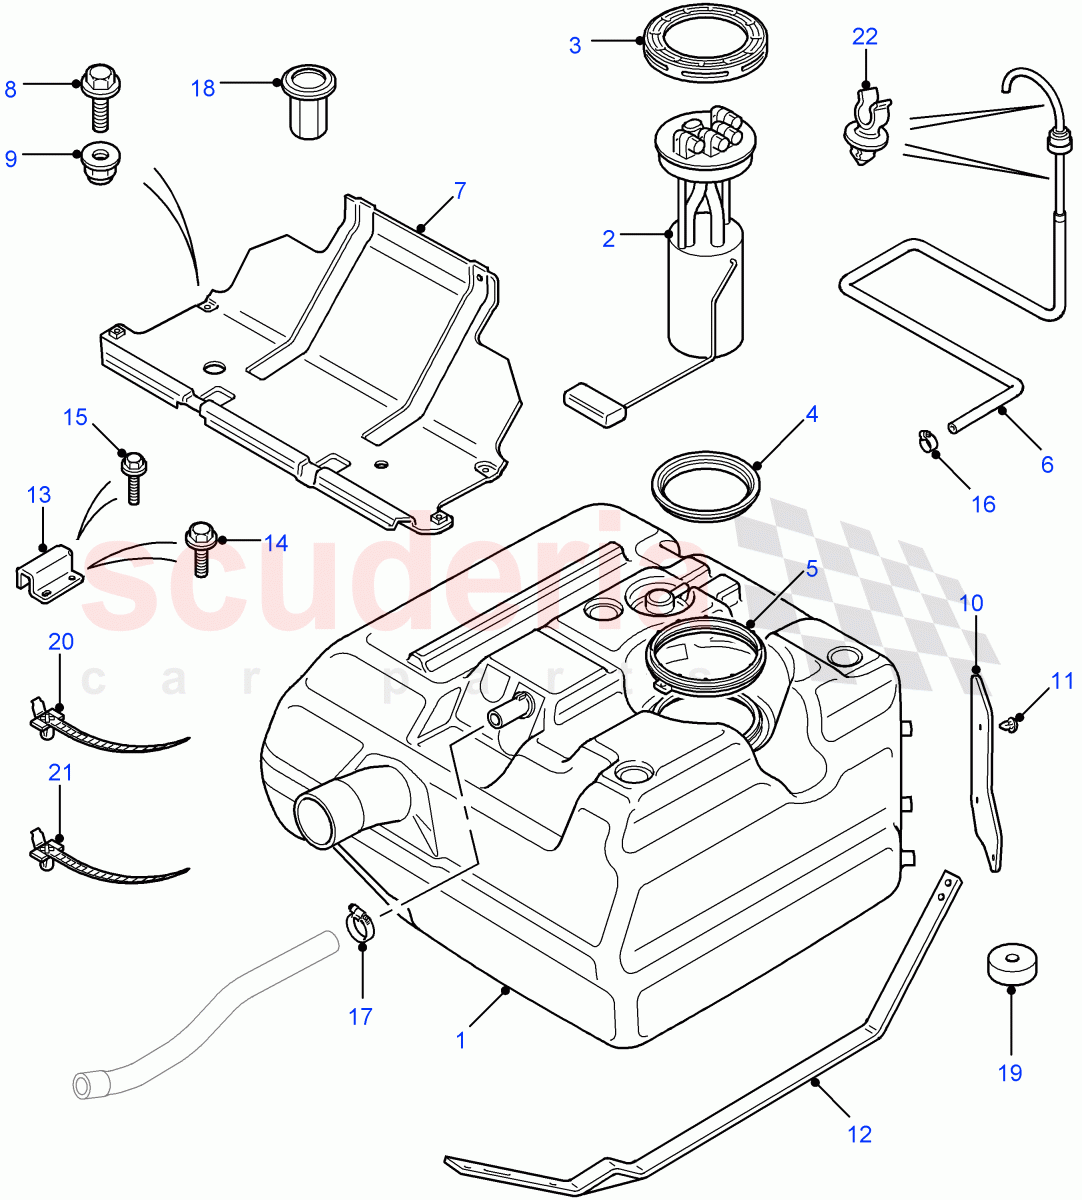 Fuel Tank & Related Parts((V)FROM7A000001,(V)TOBA999999) of Land Rover Land Rover Defender (2007-2016)